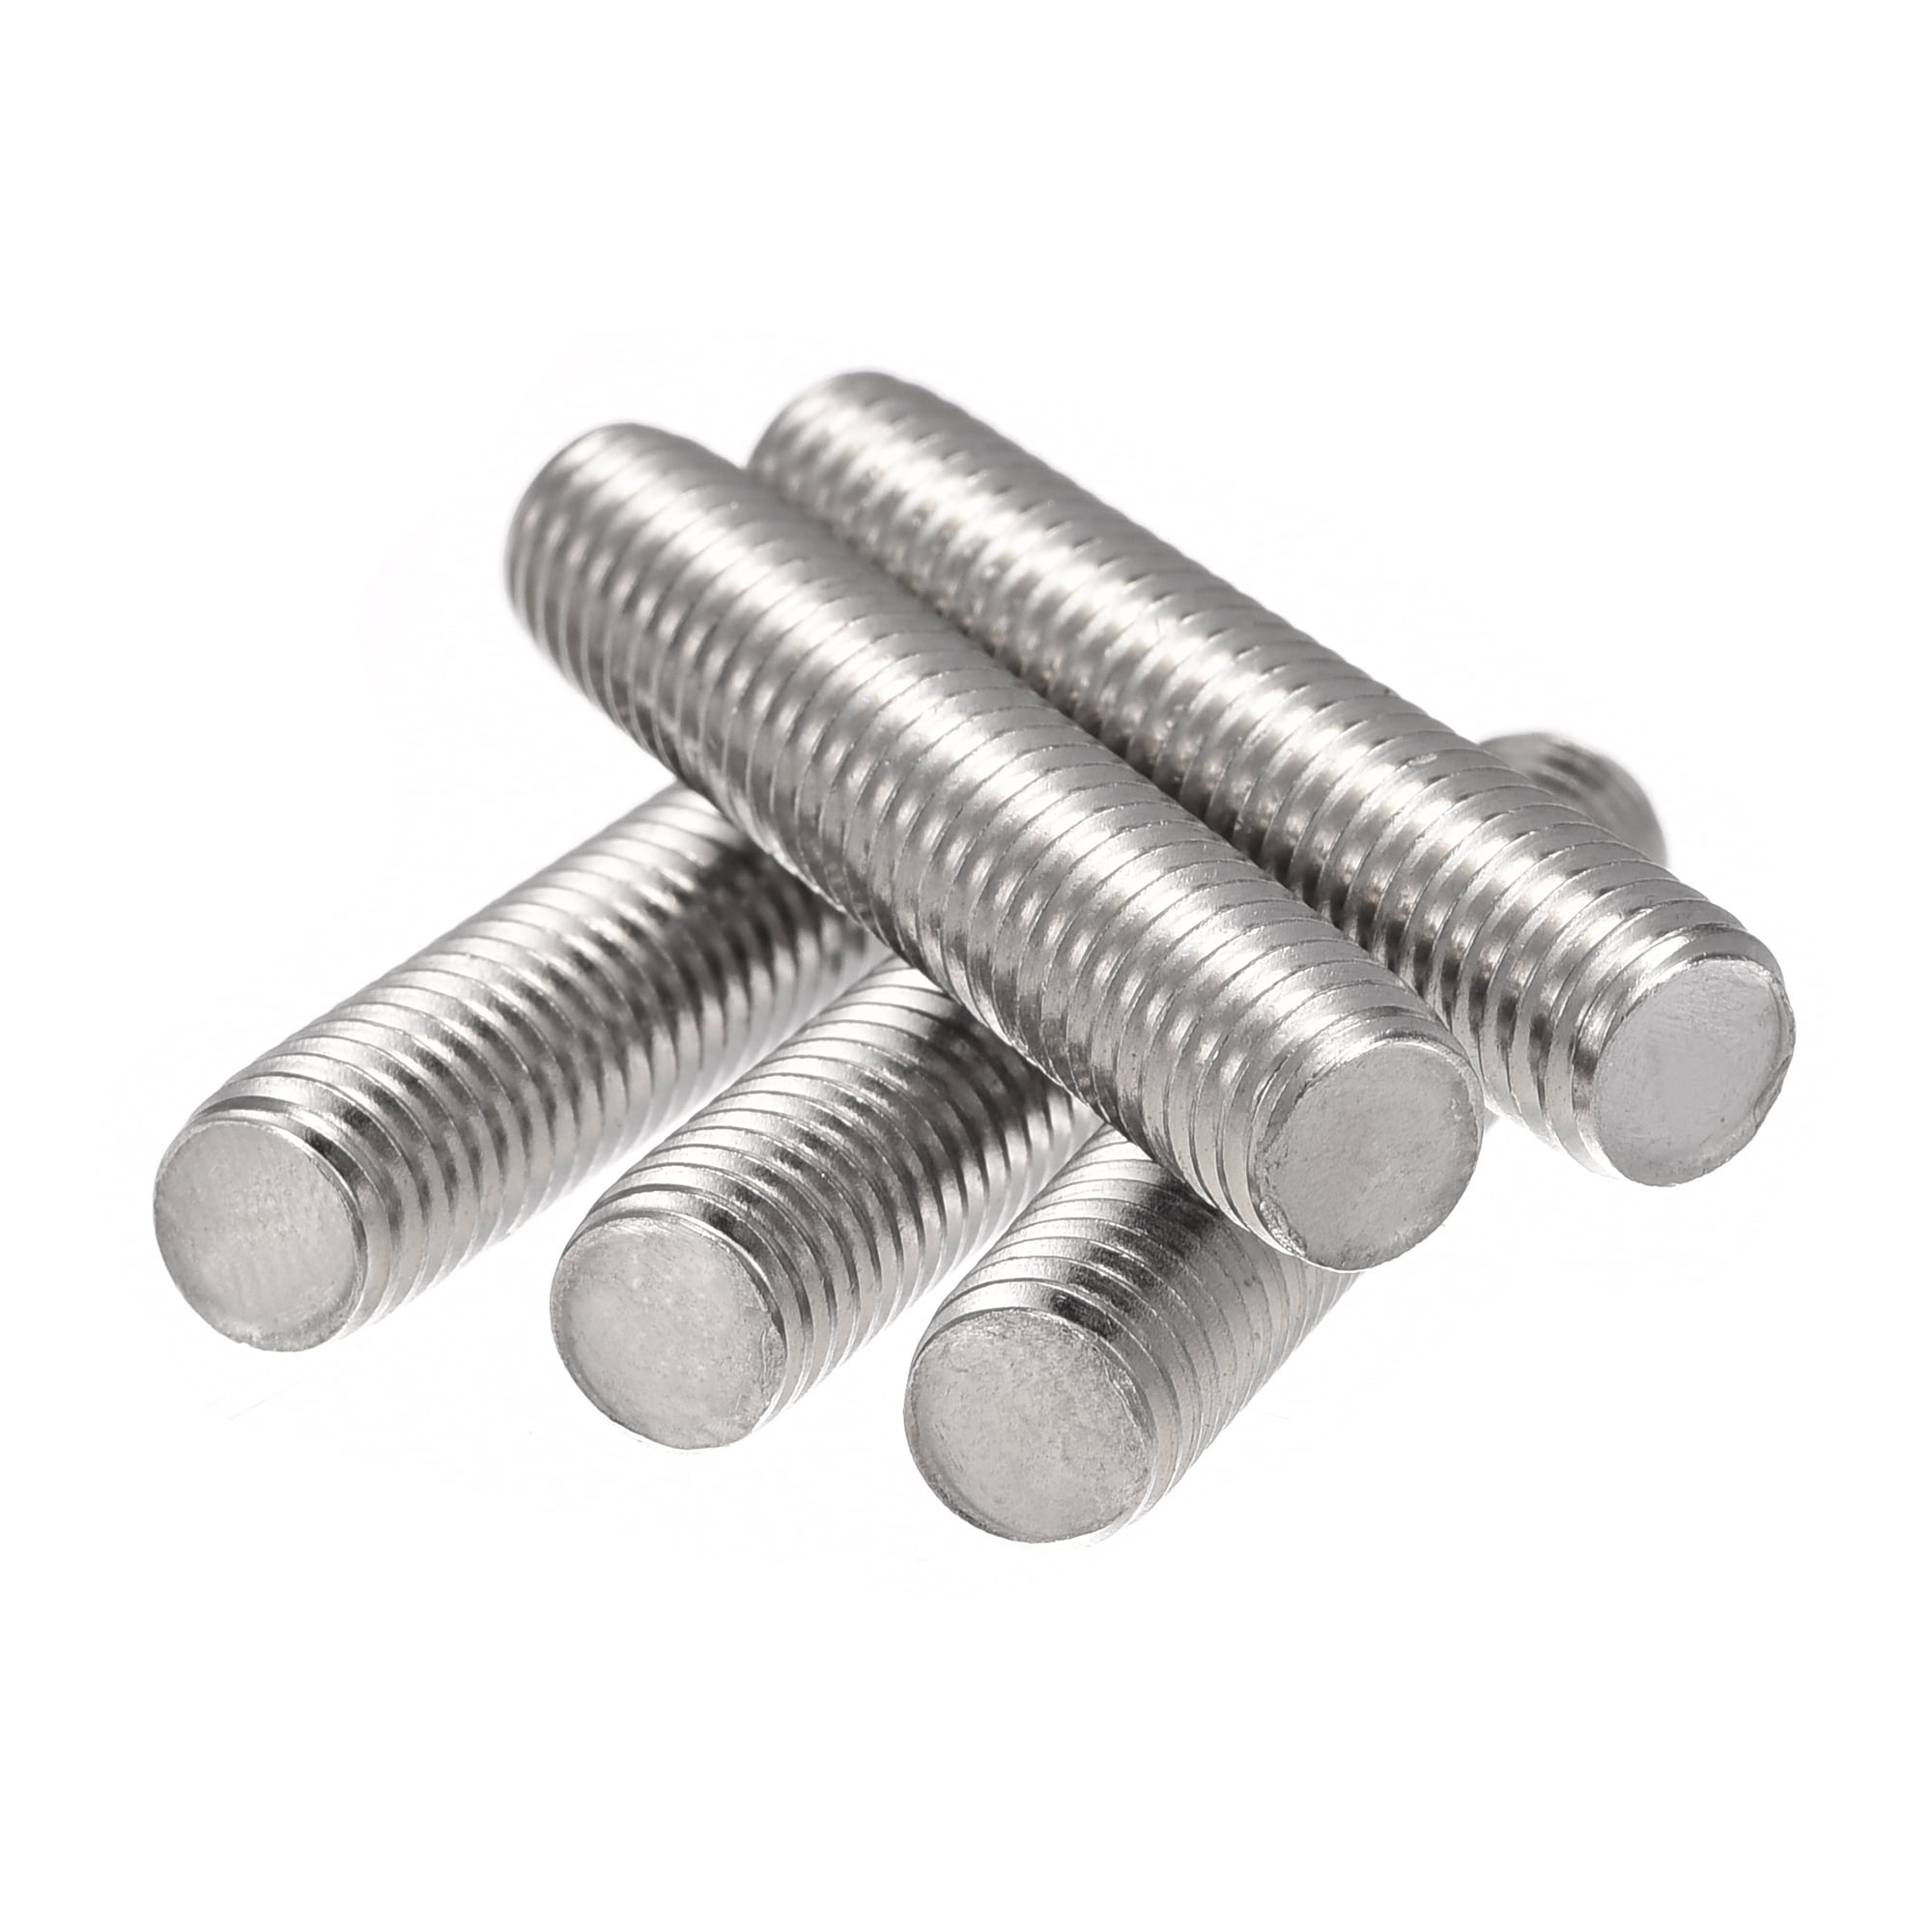 STAINLESS STEEL THREADED RODS 11 CMS INC THREE NUTS  M8 METRIC COURSE 1 5 5PACK 